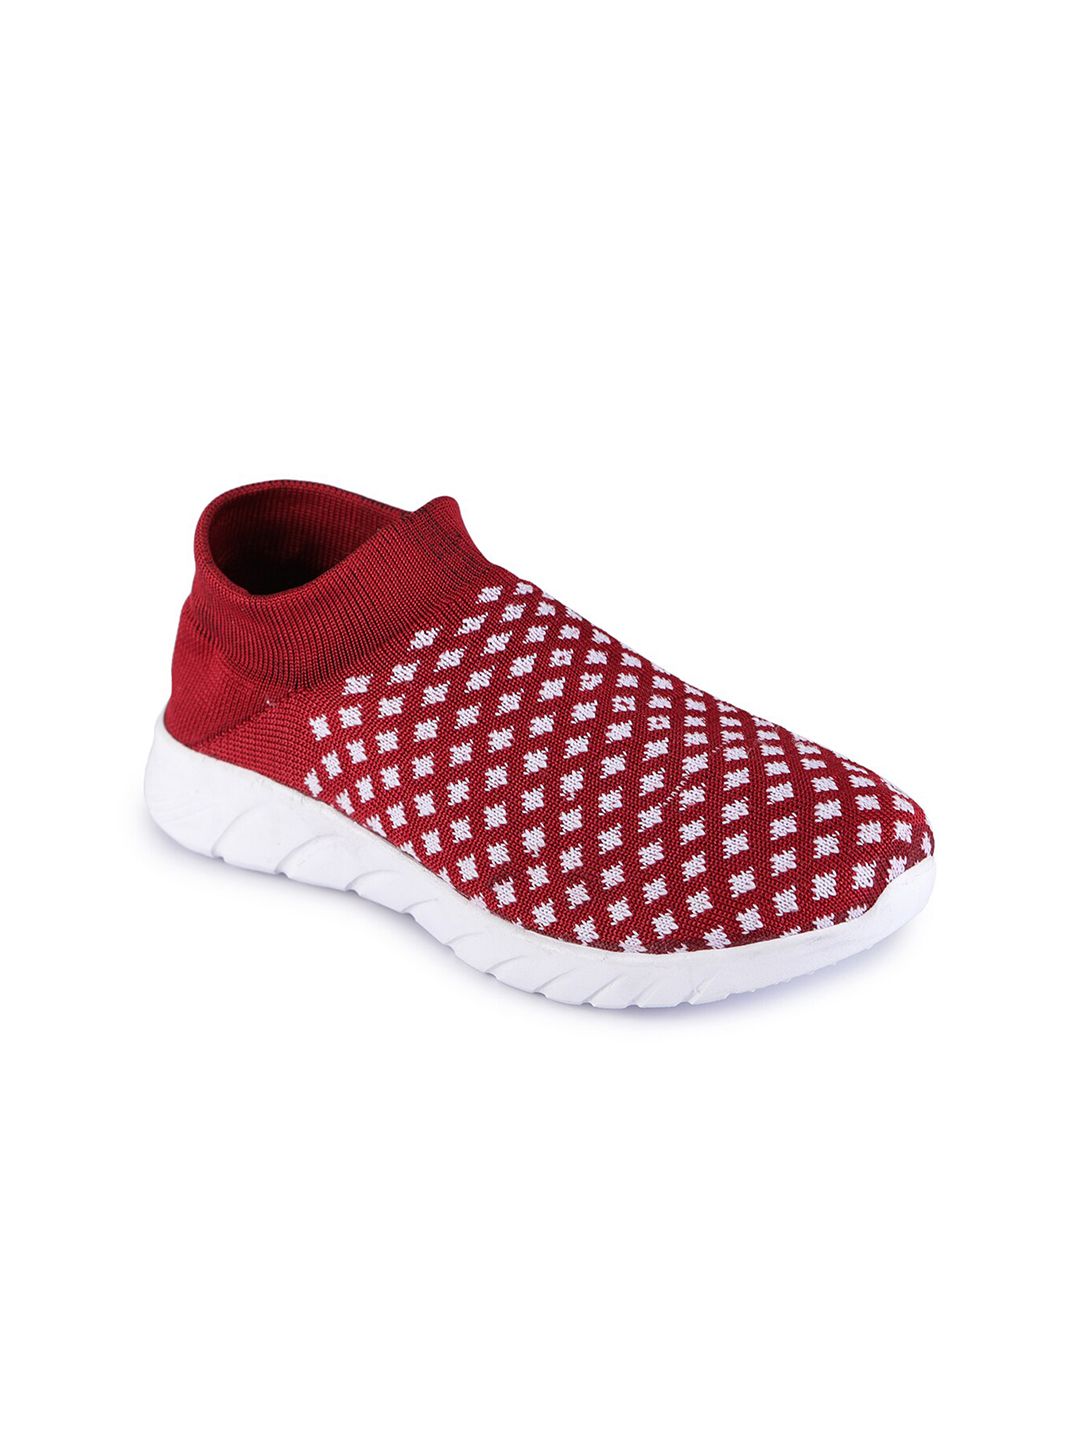 TRASE Women Maroon Textile Running Shoes Price in India